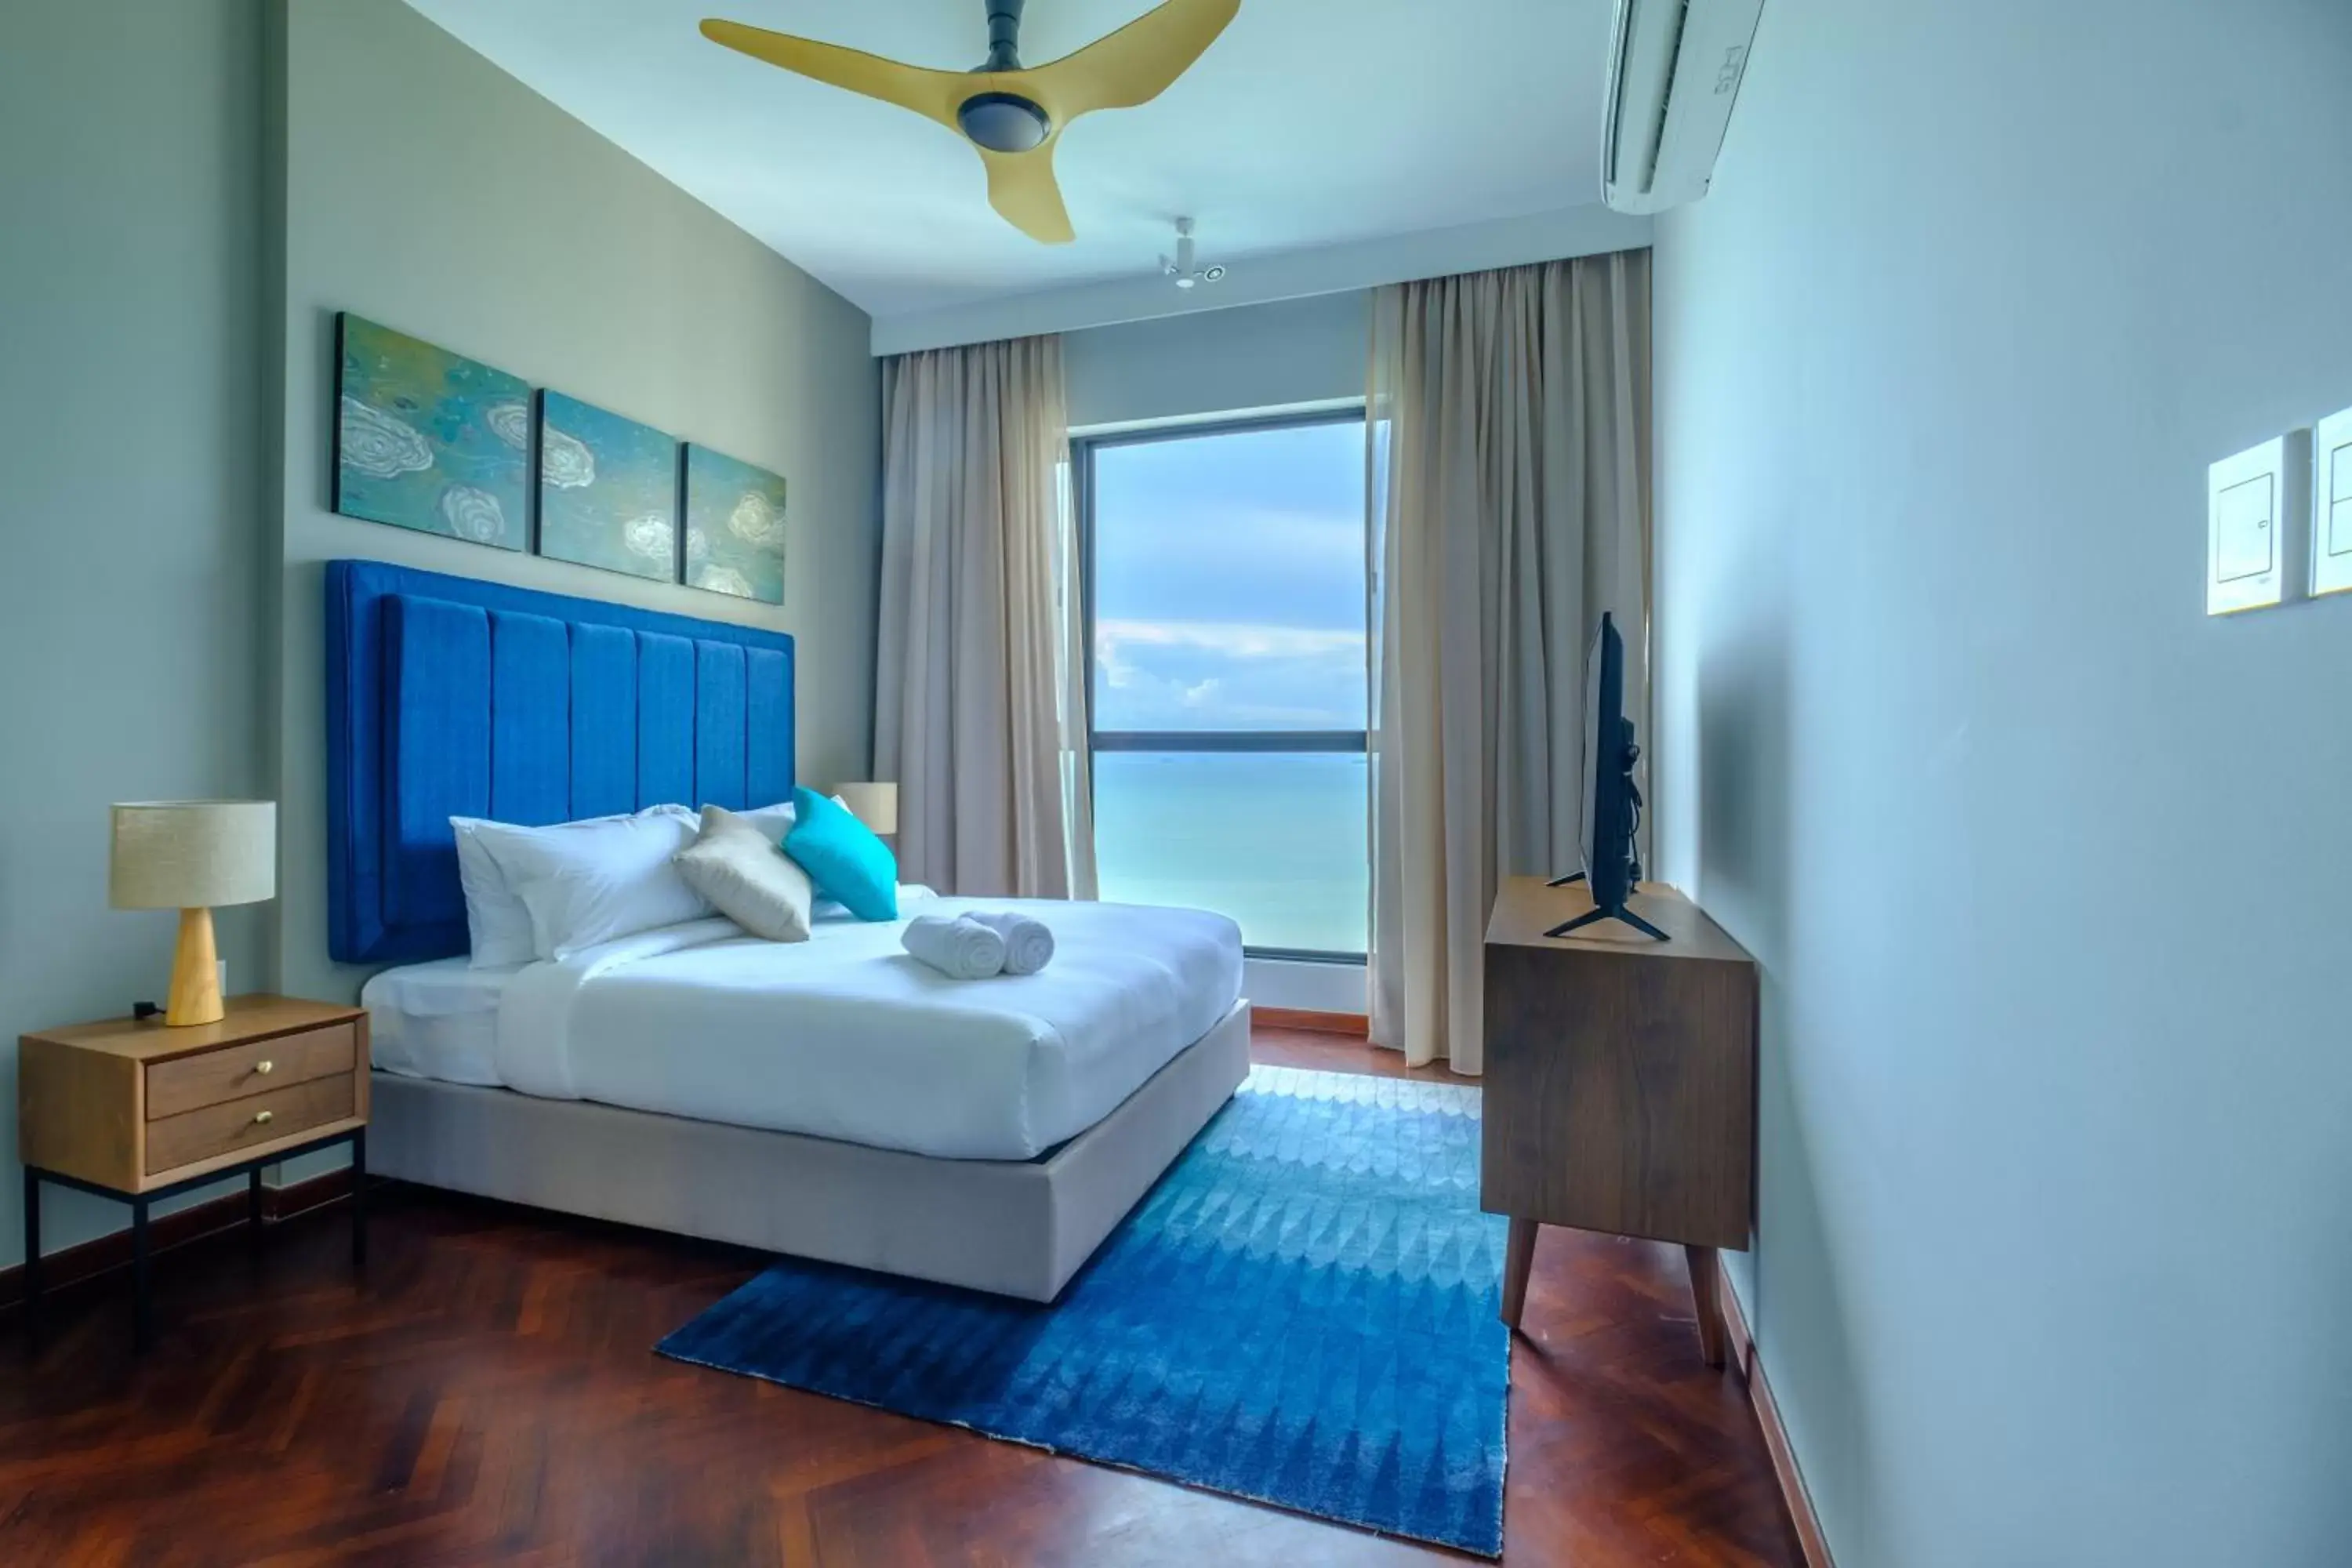 Bedroom in Tanjung Point Residences